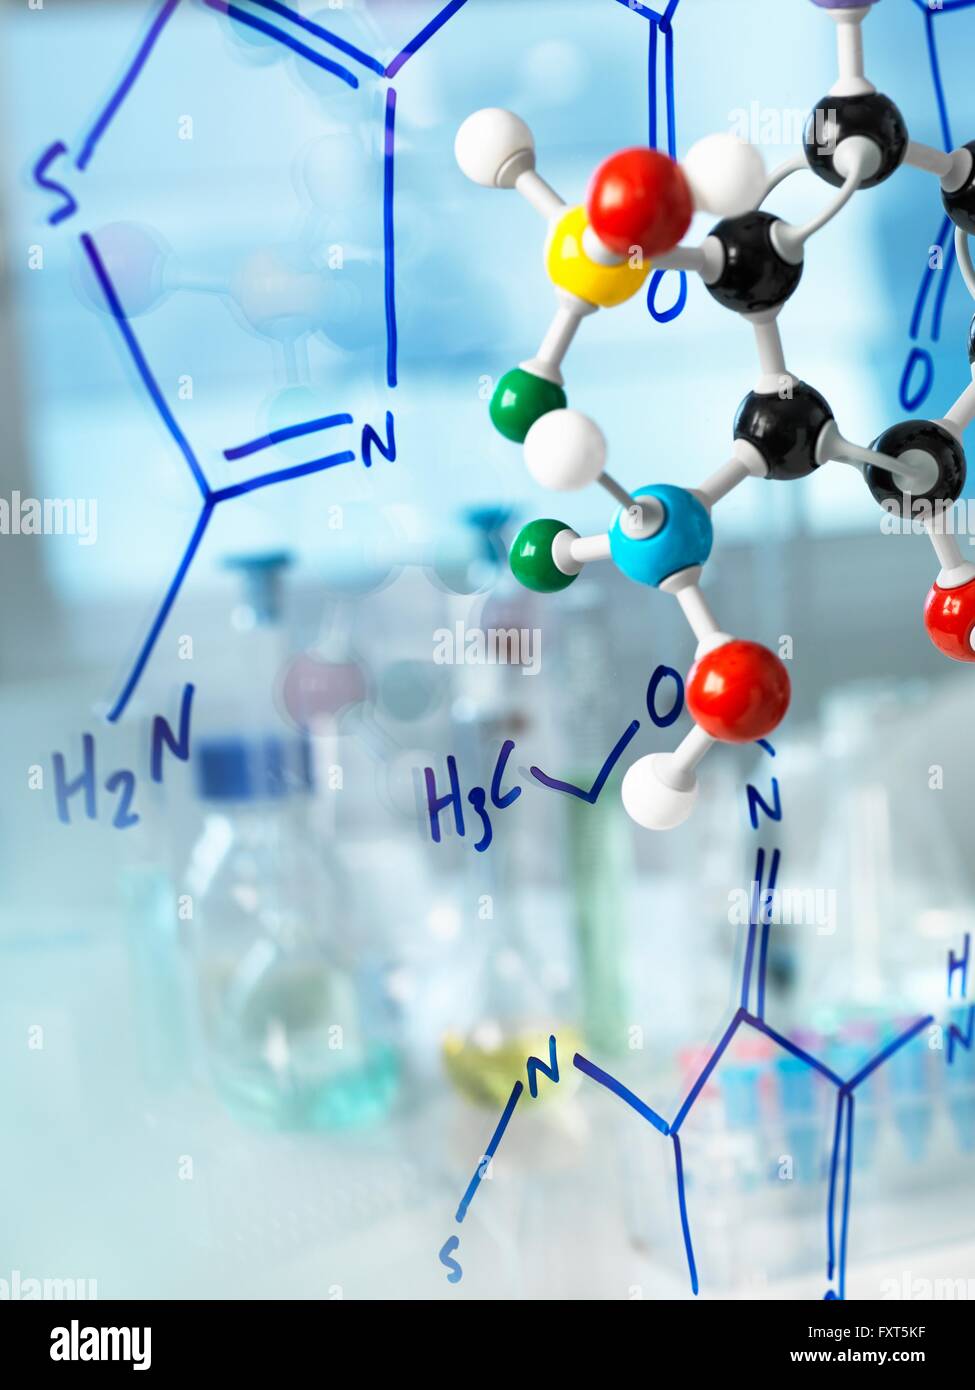 Ball and stick molecular model with formula of new drug written on glass Stock Photo